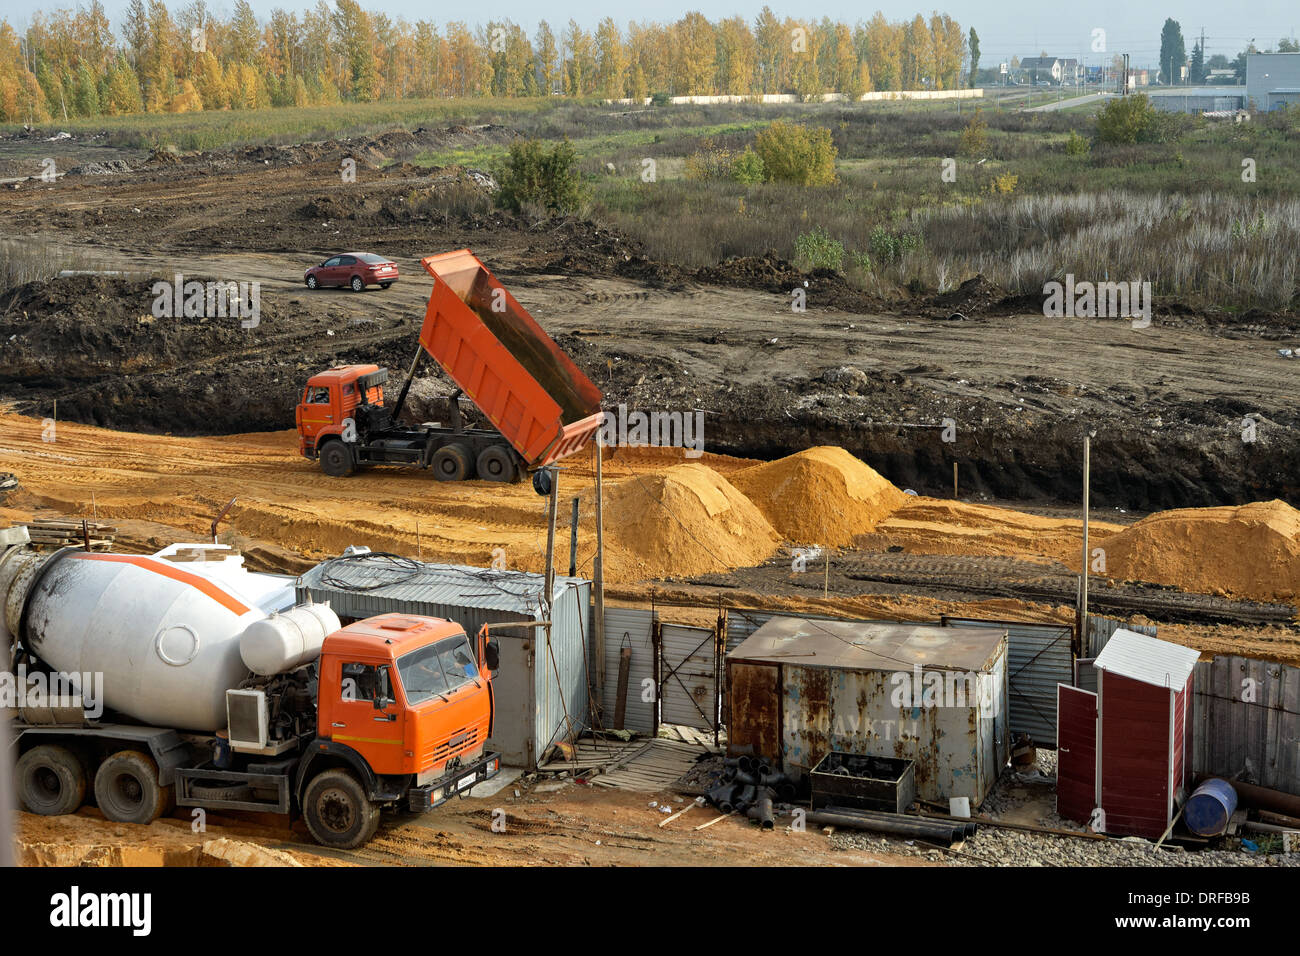 machine, earth, dirt, street, sand, auto, land vehicle, mixing, vehicle, mixer, no people, concreting, freight, truckload, blend Stock Photo